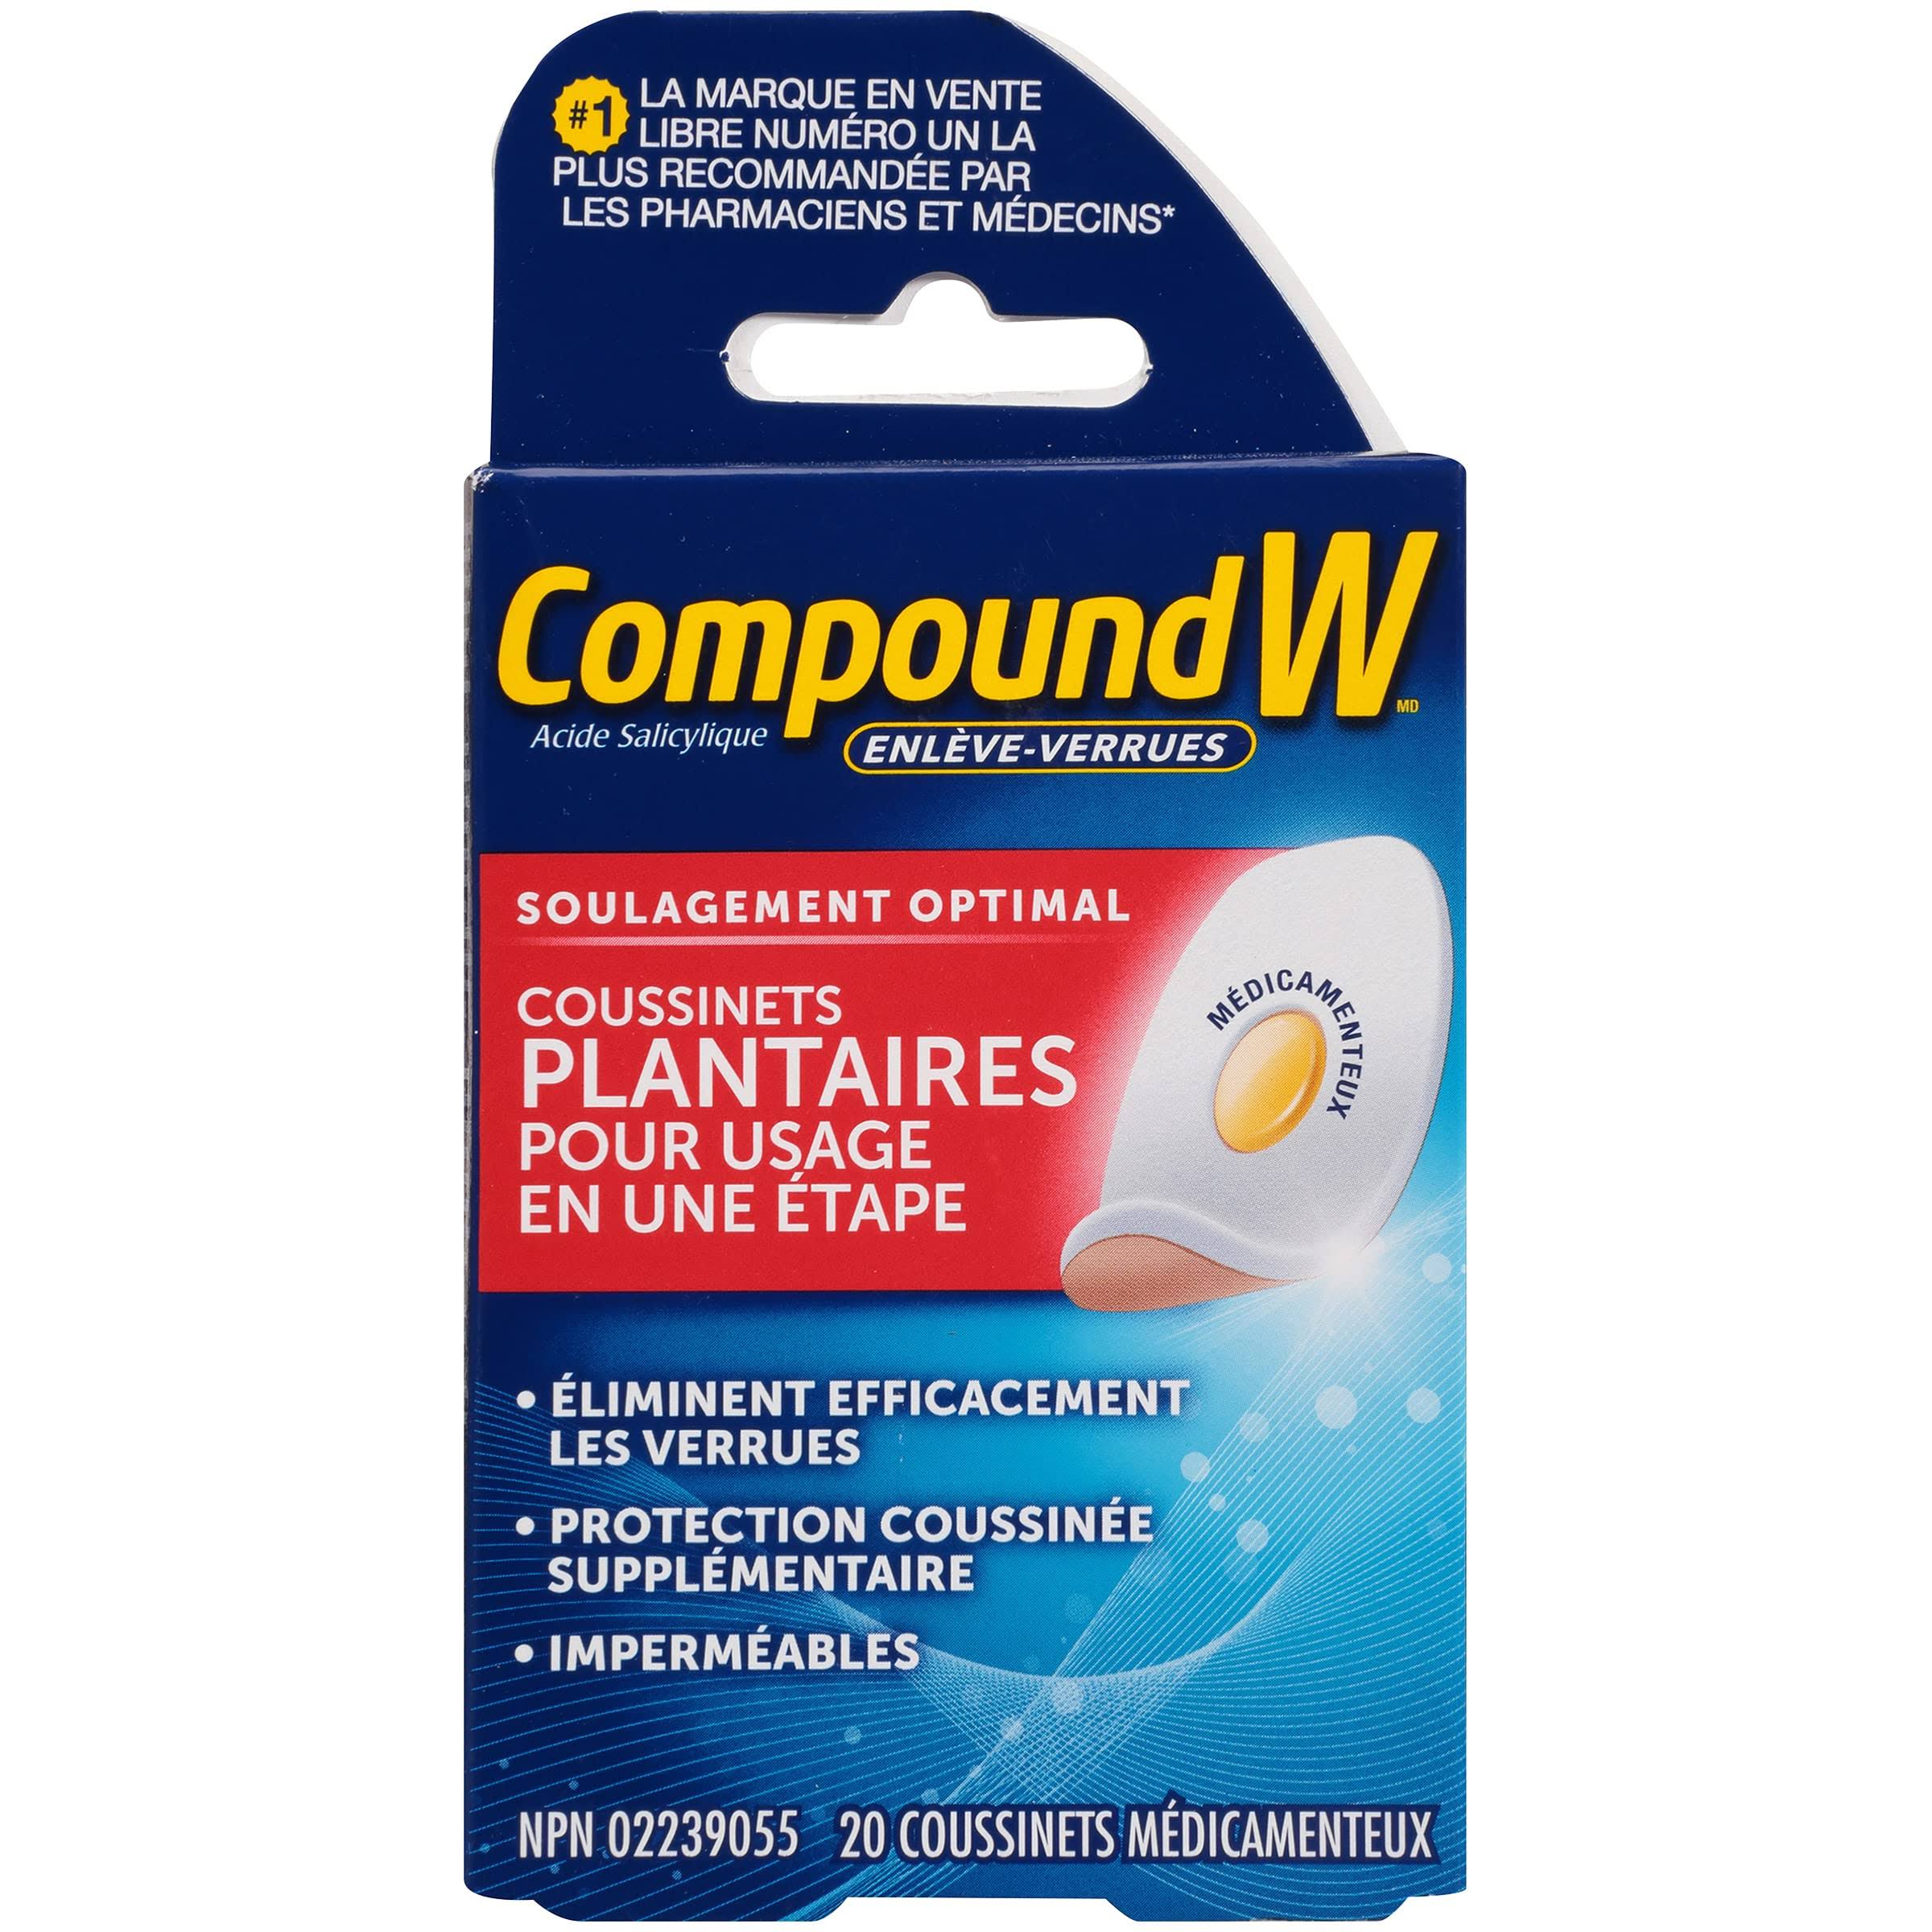 Compound W Wart Remover, One Step Plantar Foot Pads - 20 ct